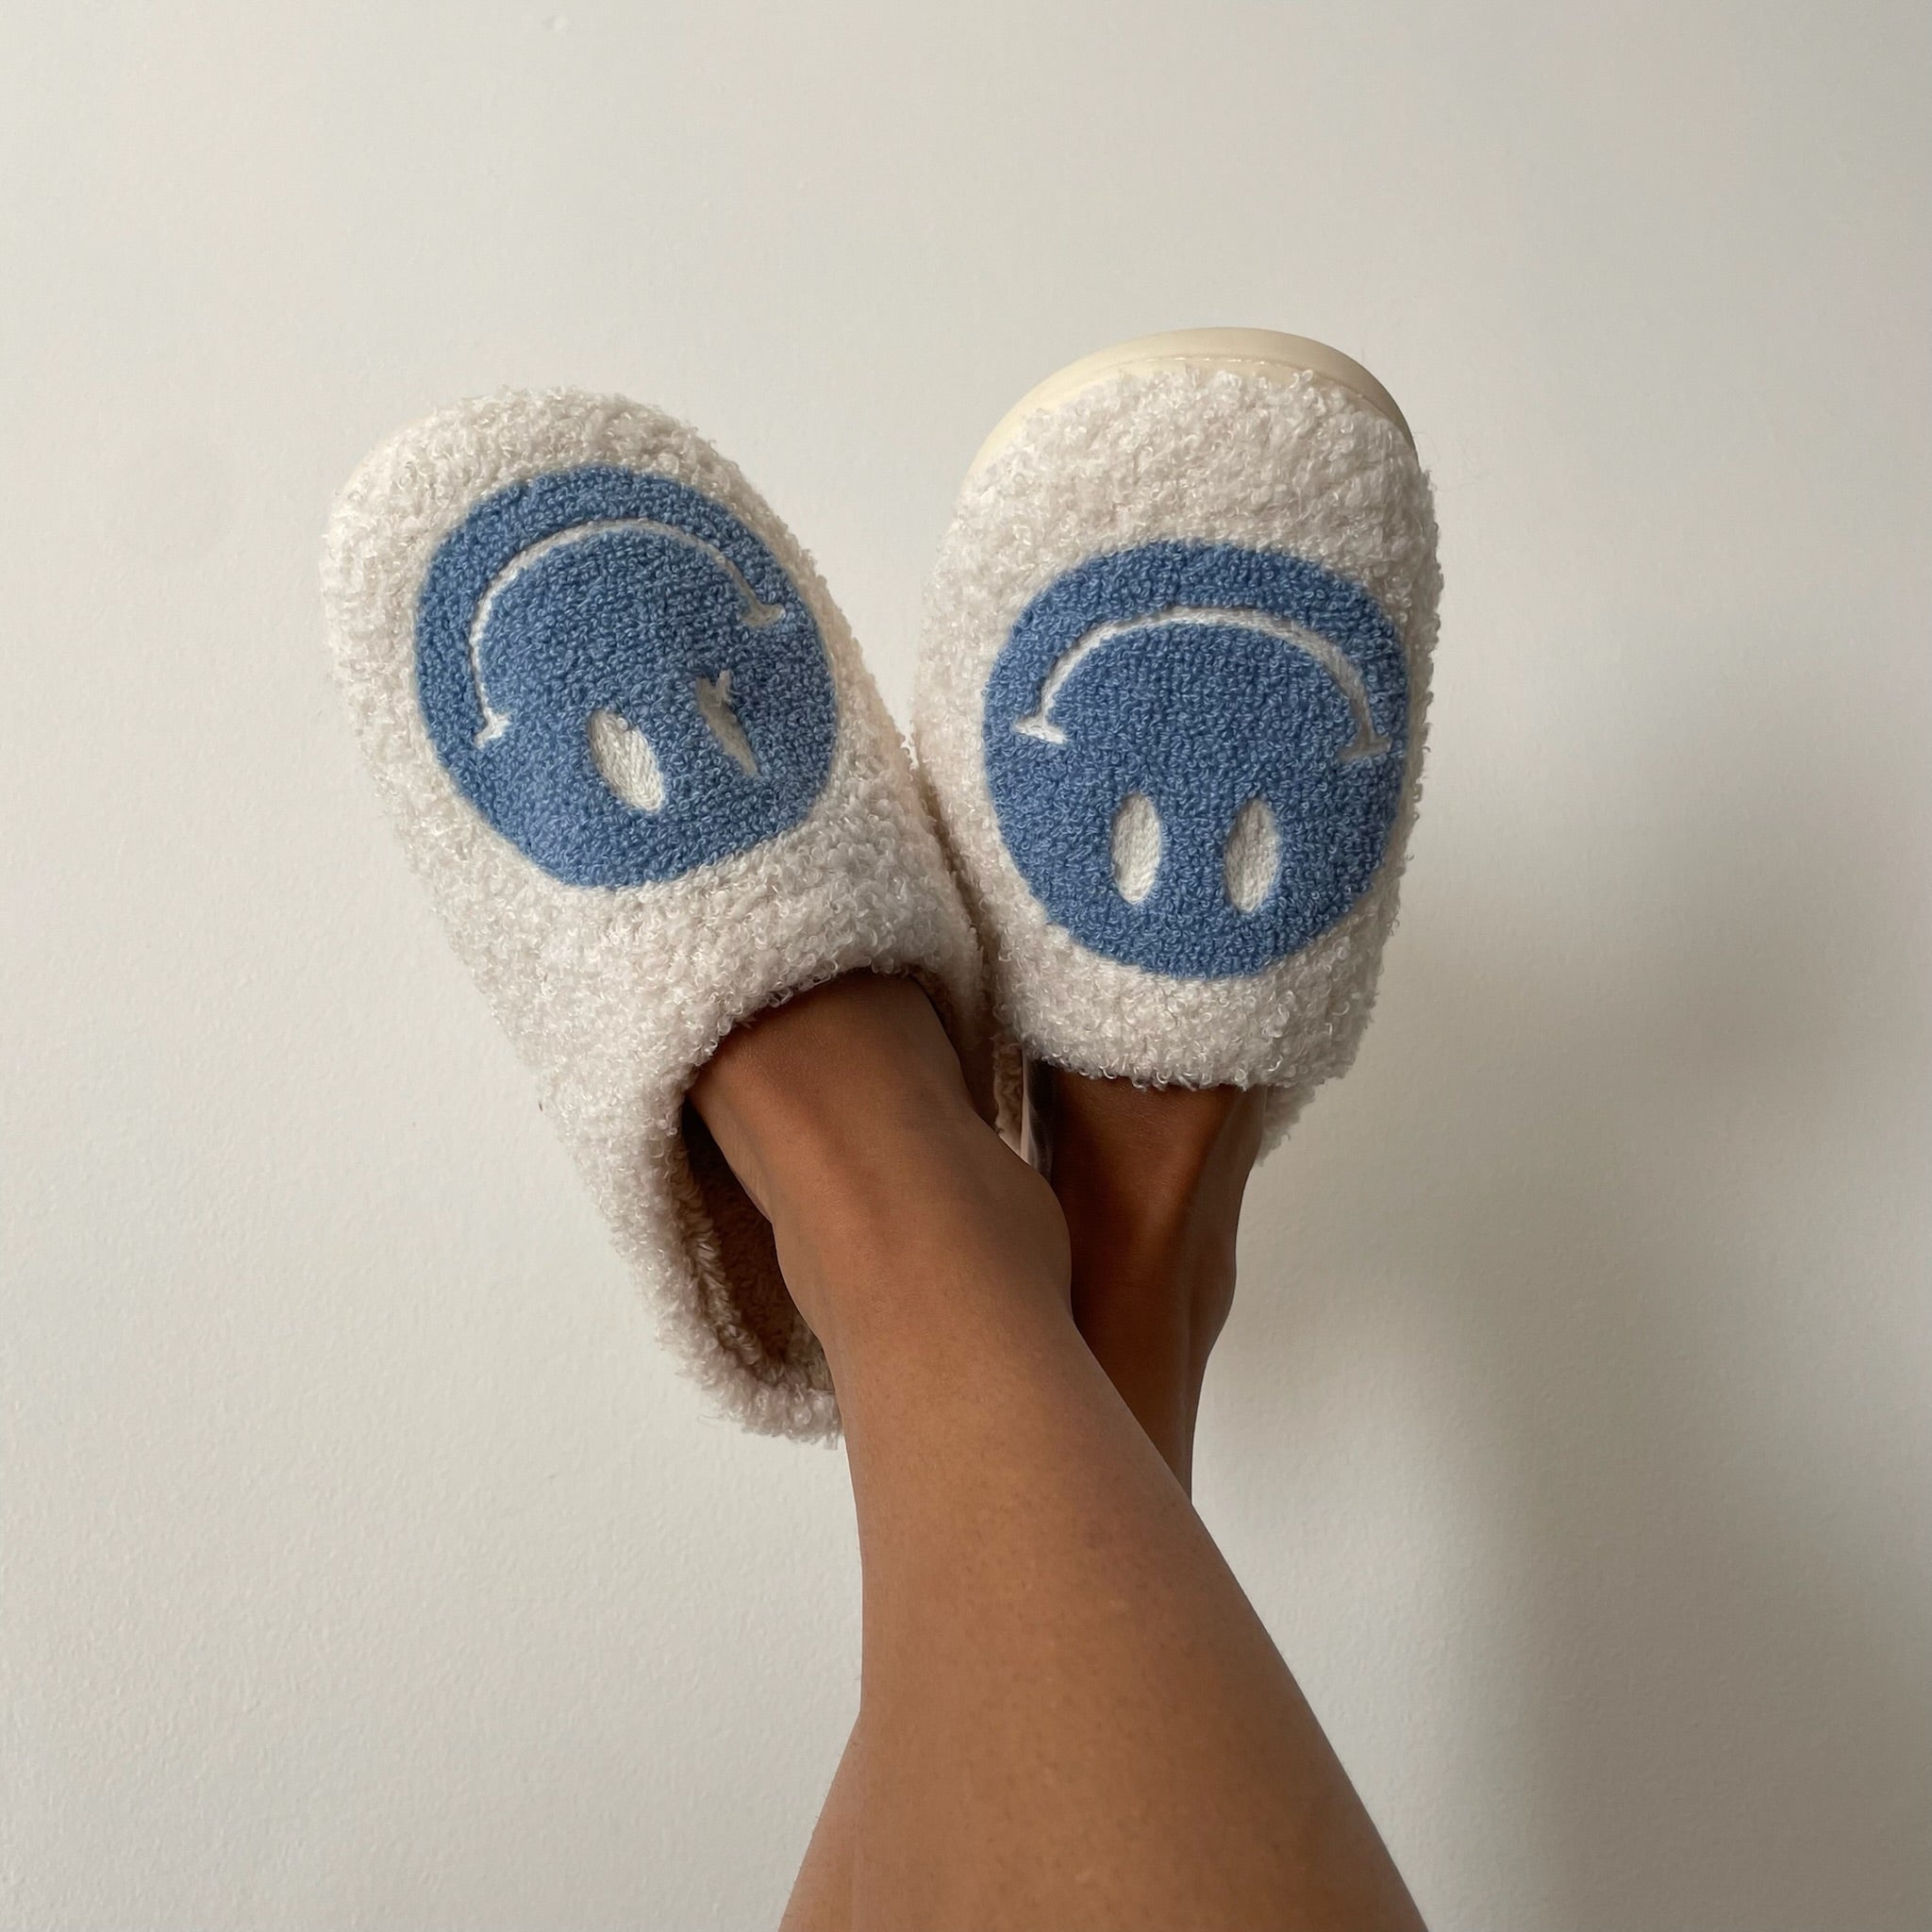 A girl wearing white slippers with blue smiley faces on them. Herr legs are up against a white background